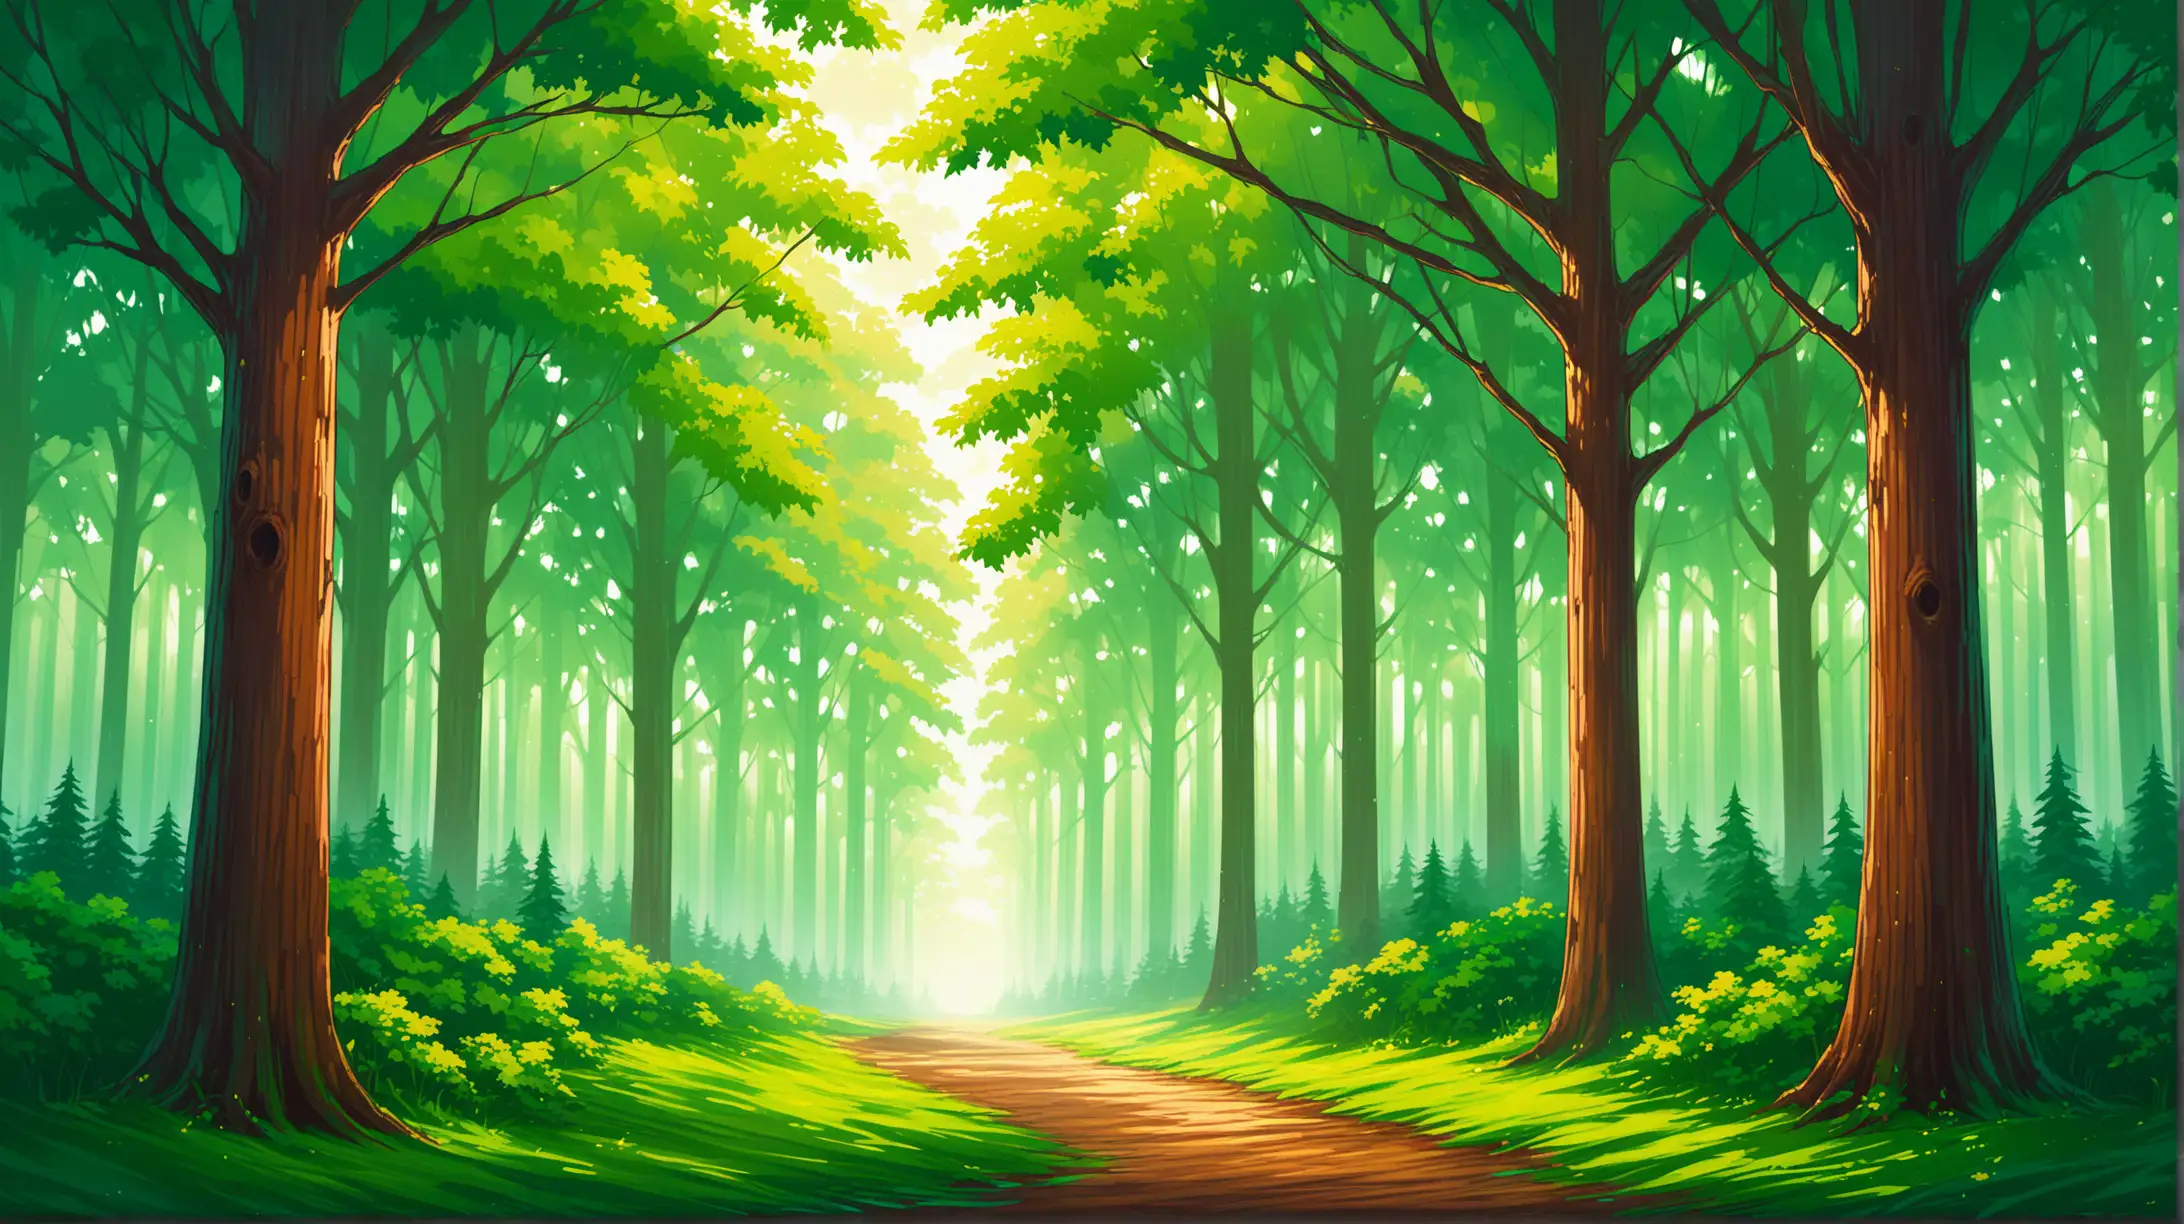 Enchanted Forest Scene with Towering Trees Madhouse Studio Artwork